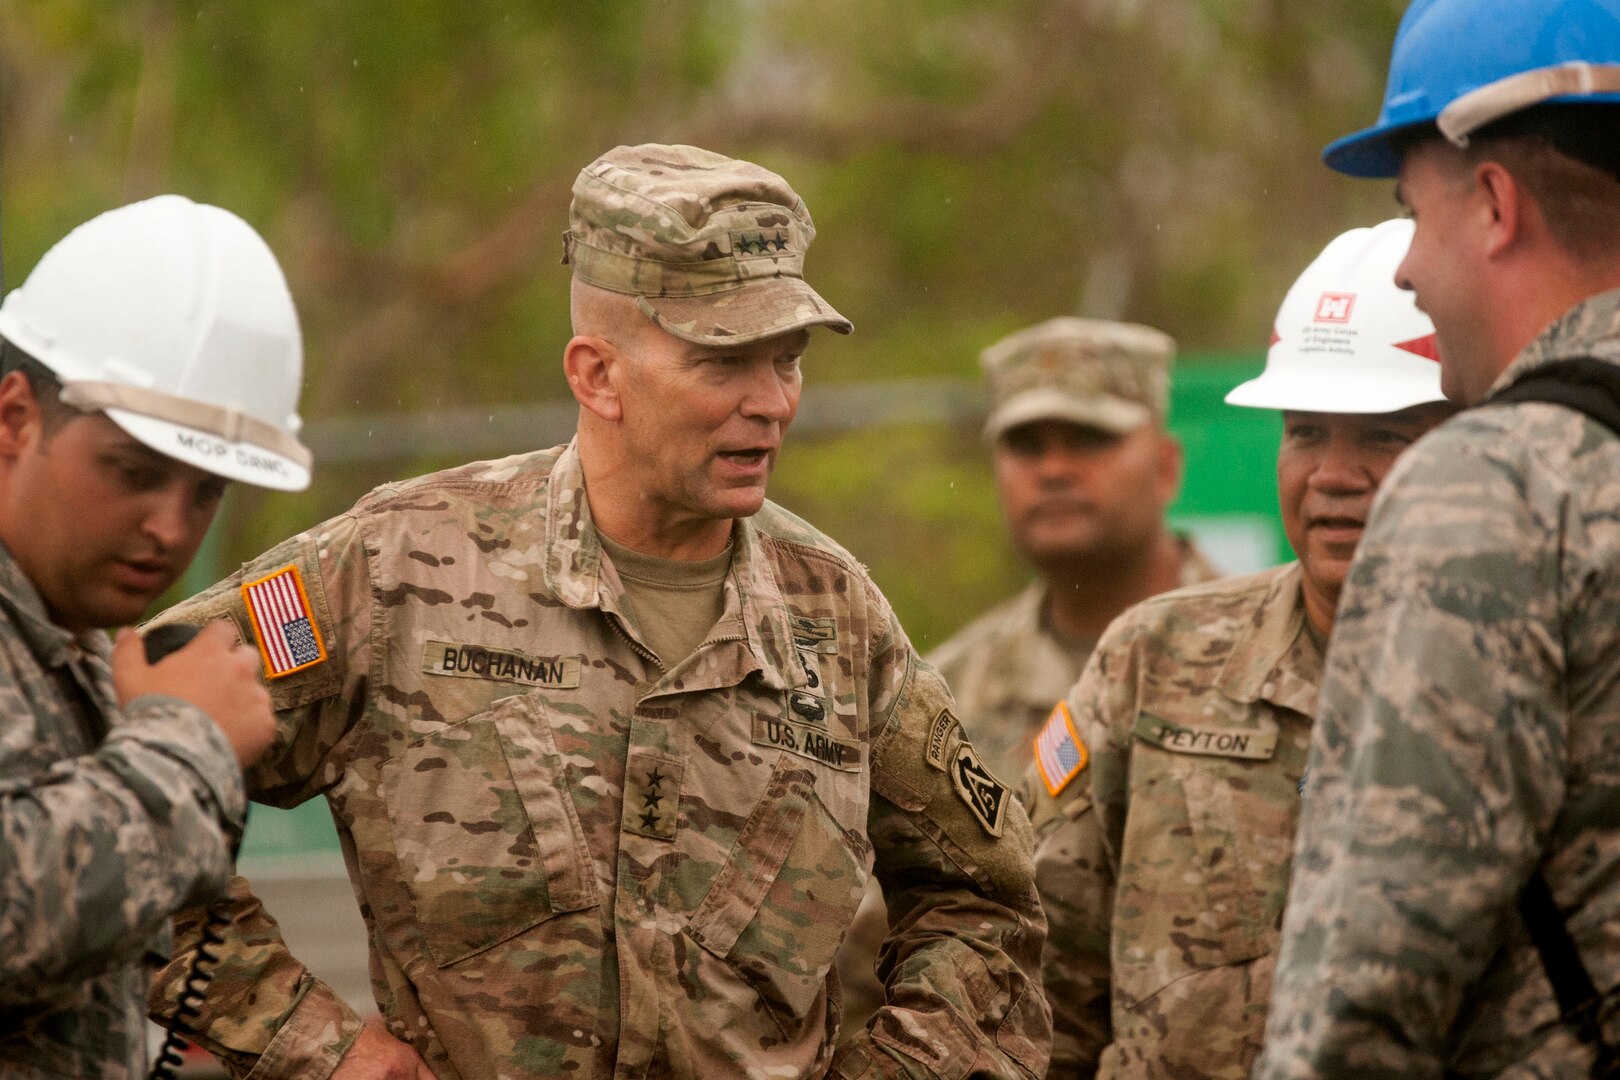 Lt. Gen. Jeffrey S. Buchanan, commander, U.S. Army North (Fifth Army) at Joint Base San Antonio-Fort Sam Houston, speaks with civil engineer Airmen from the 85th Engineering Installation Squadron, Keesler Air Force Base, Miss., at a communication tower located in the mountains of Pugnado Adentro in Vega Baja, Puerto Rico, Nov. 8, 2017. Several civil engineer Airmen were assisting local contractors repair the communication tower that works as a main communication radio hub for the island.